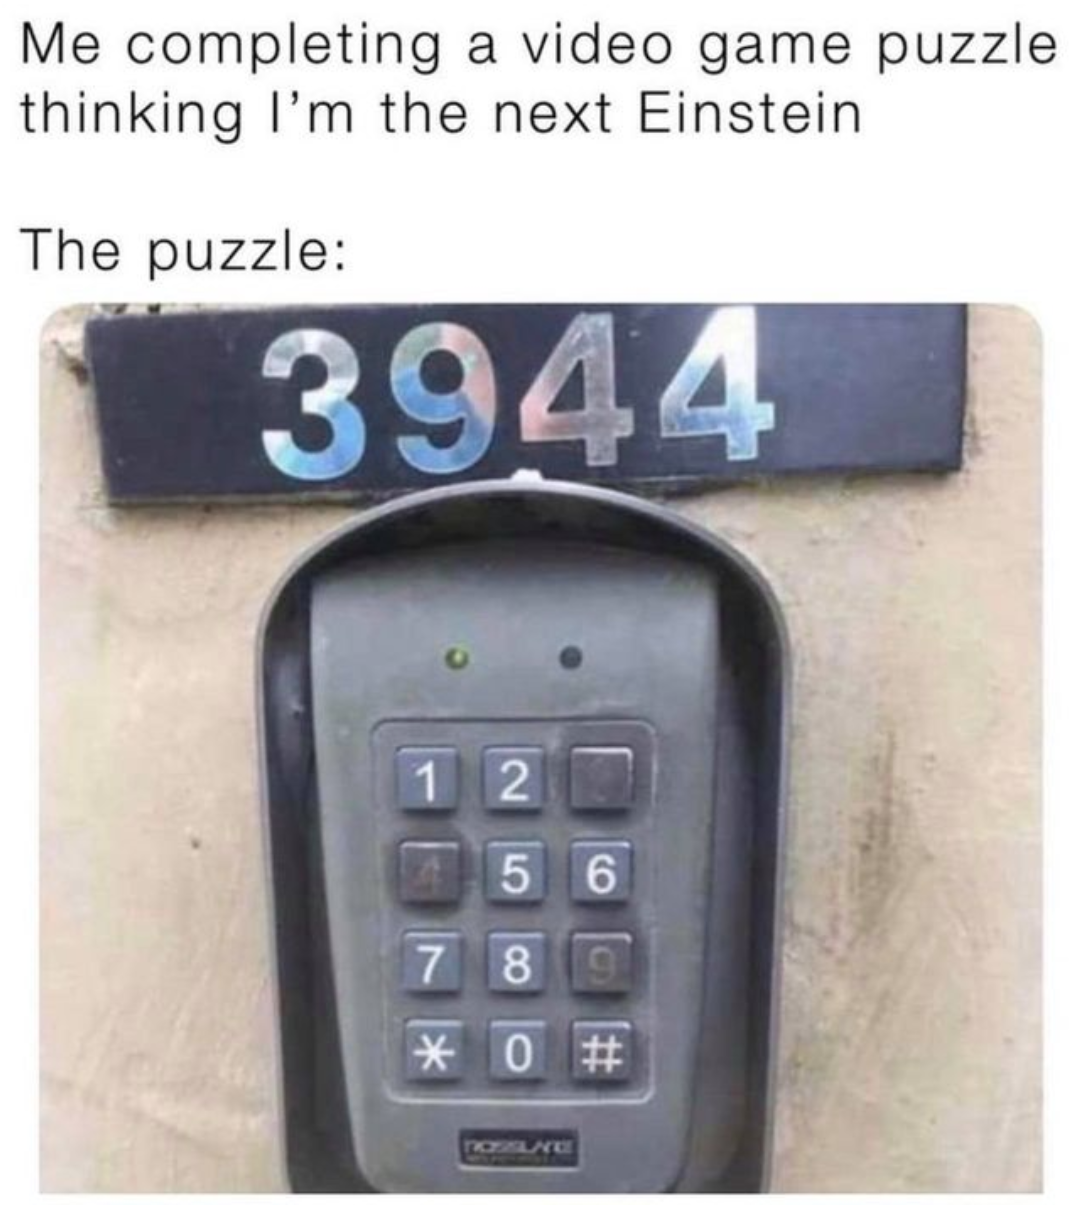 funny gaming memes - hardware - Me completing a video game puzzle thinking I'm the next Einstein The puzzle 3944 1 2 5 6 7 8 9 0 #